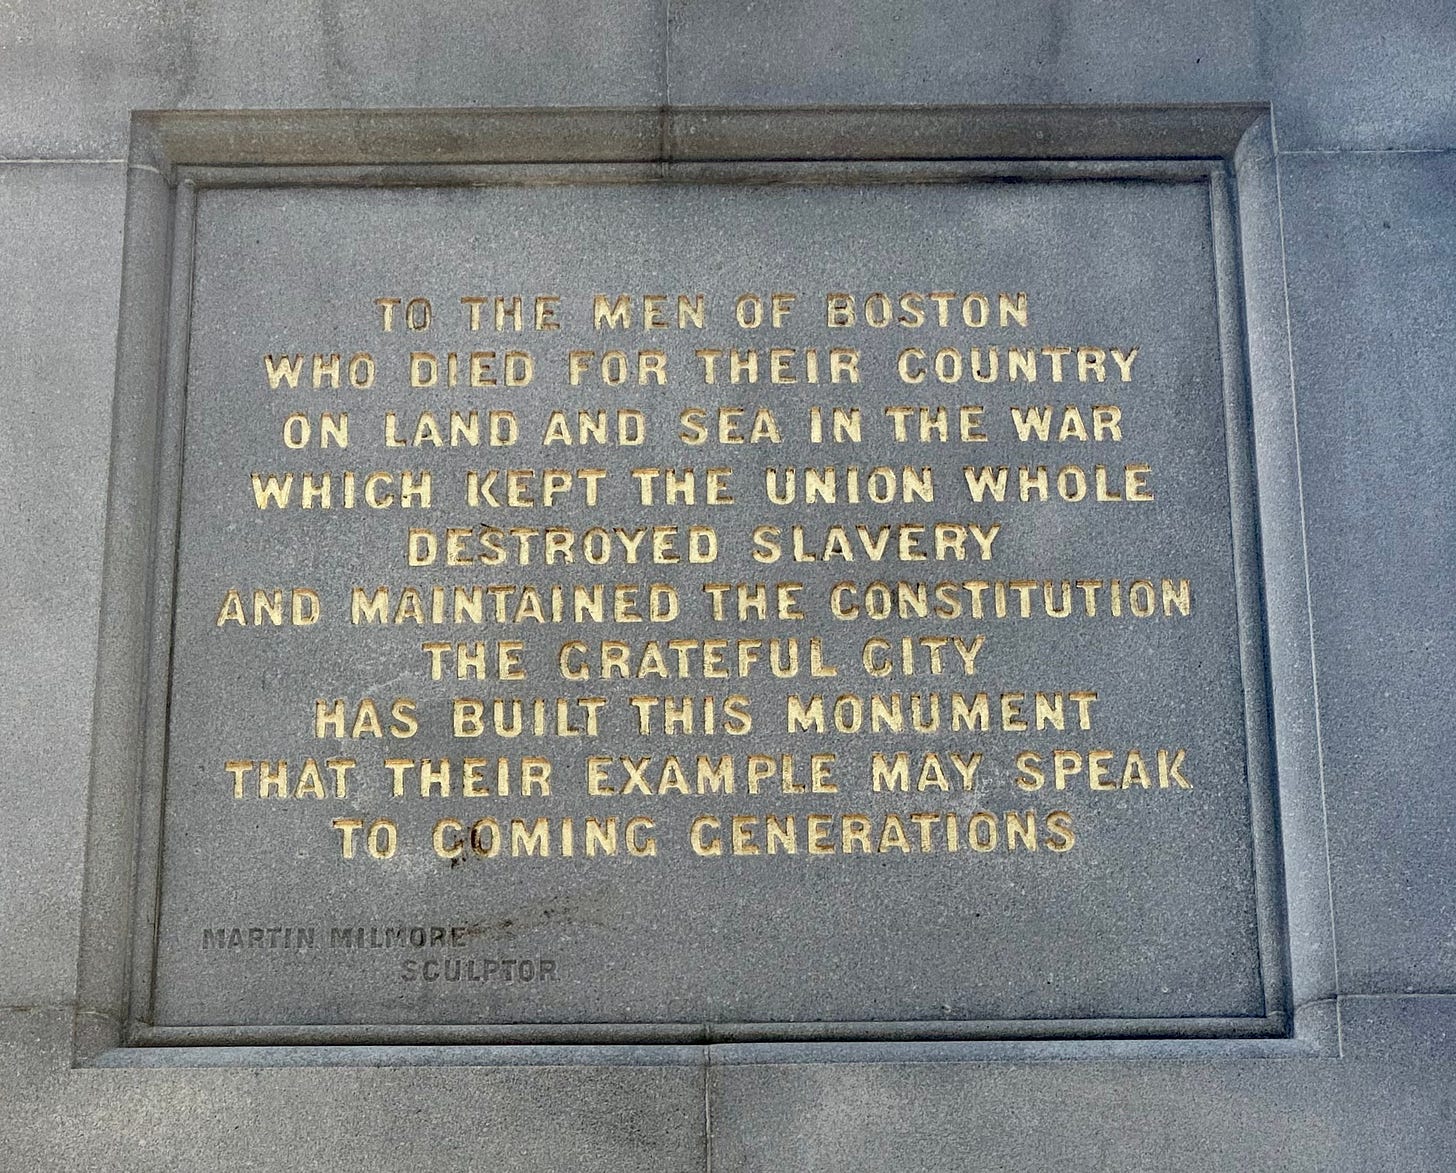 Inscription on Soldiers and Sailors Monument to men of Boston killed during the Civil War, Boston Common, September 26, 2023